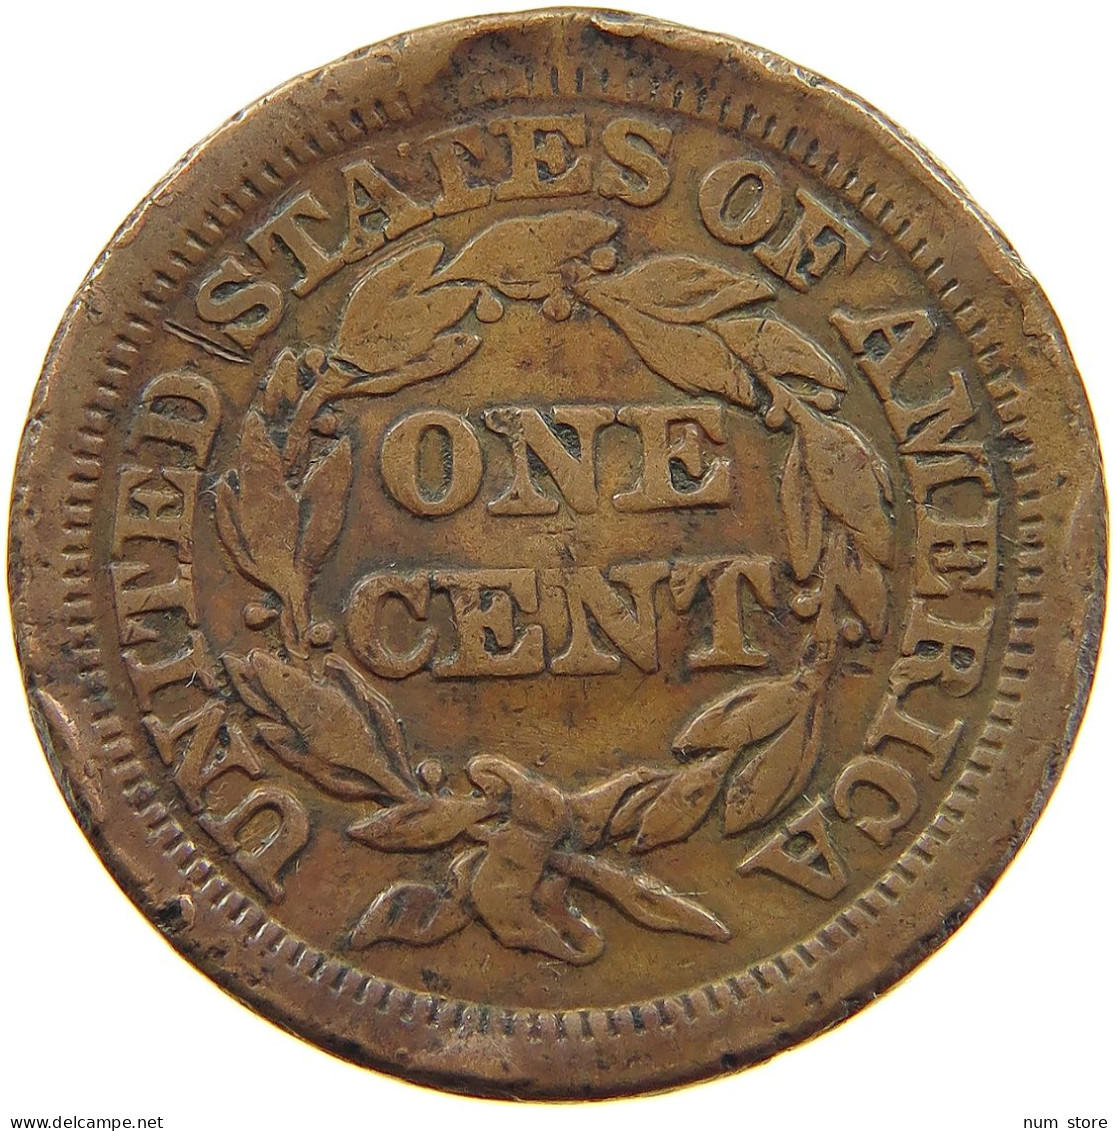 UNITED STATES OF AMERICA LARGE CENT 1853 Braided Hair #a007 0339 - 1840-1857: Braided Hair (Capelli Intrecciati)